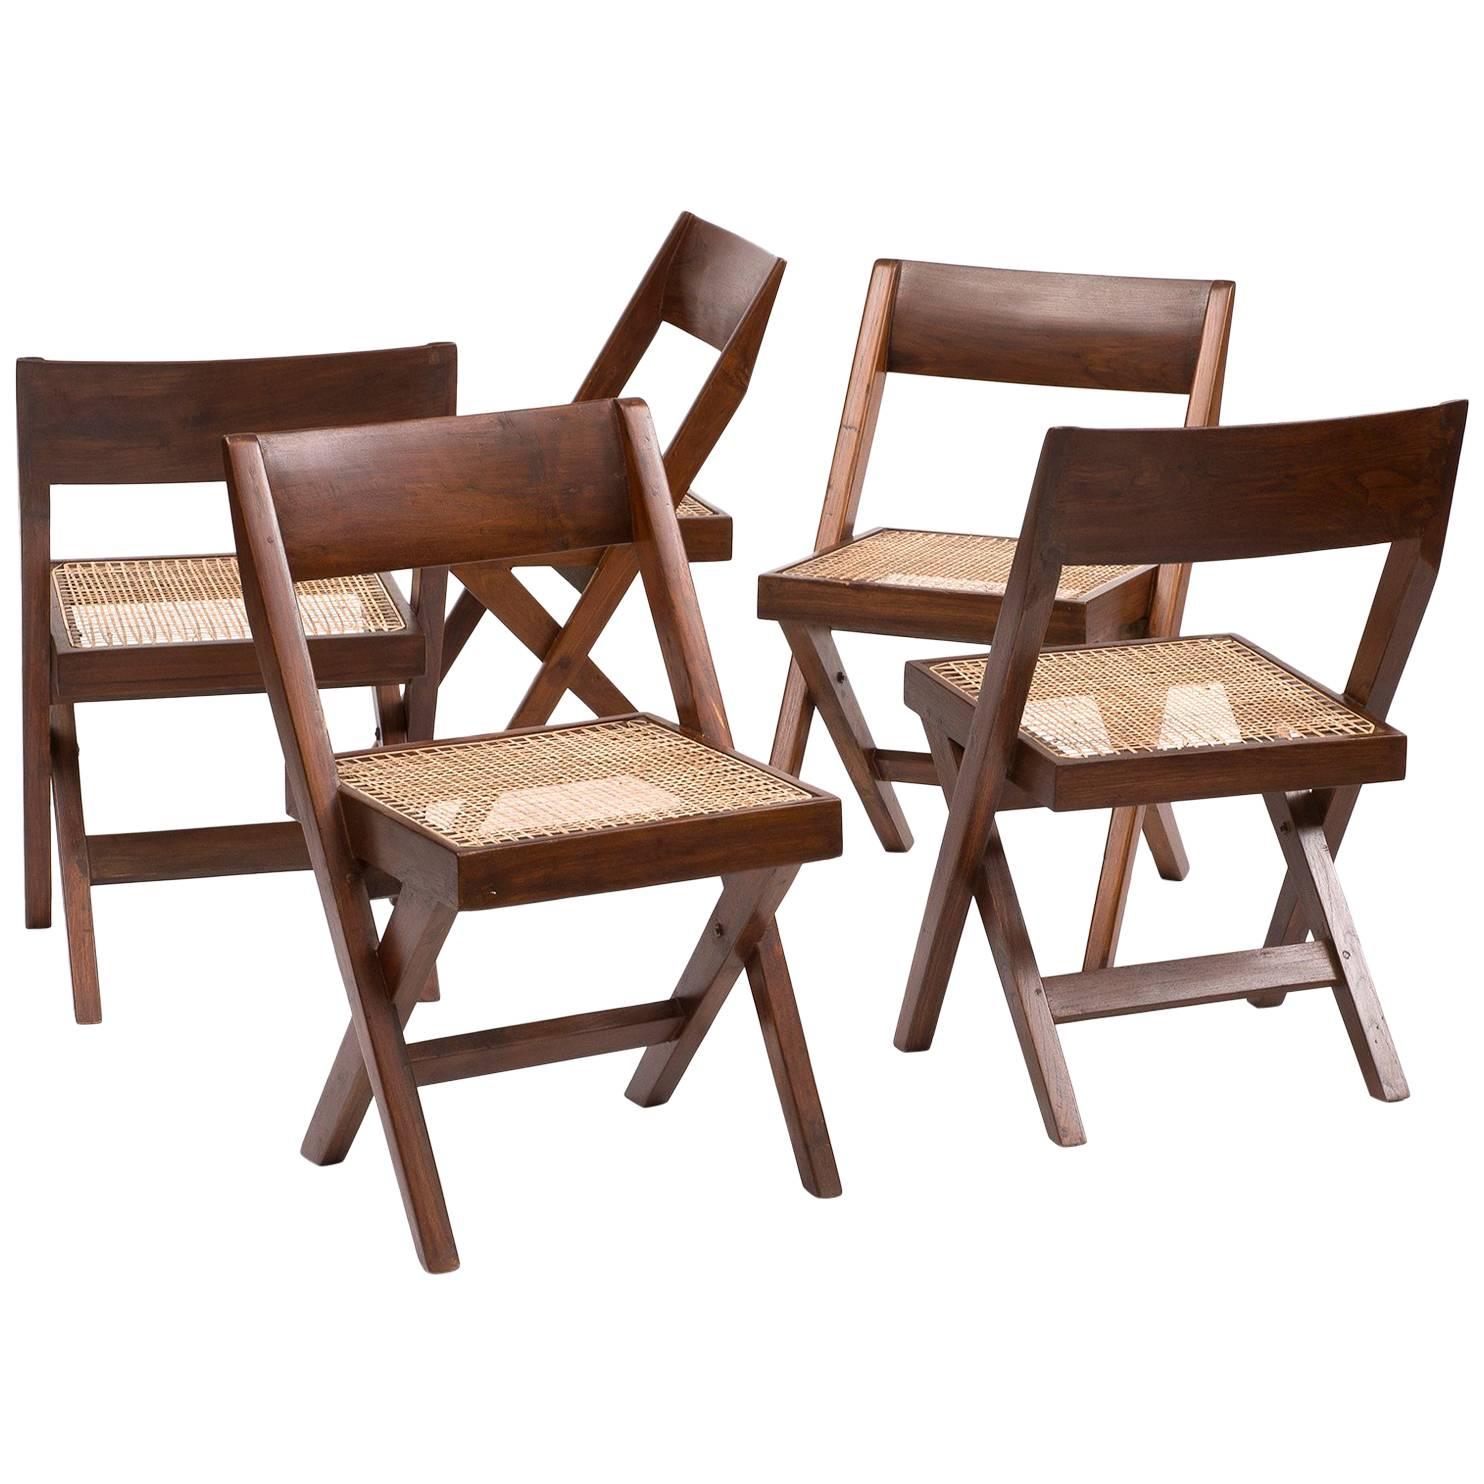 Set of Six Pierre Jeanneret Library Chairs in Teak from Chandigarh, 1950s